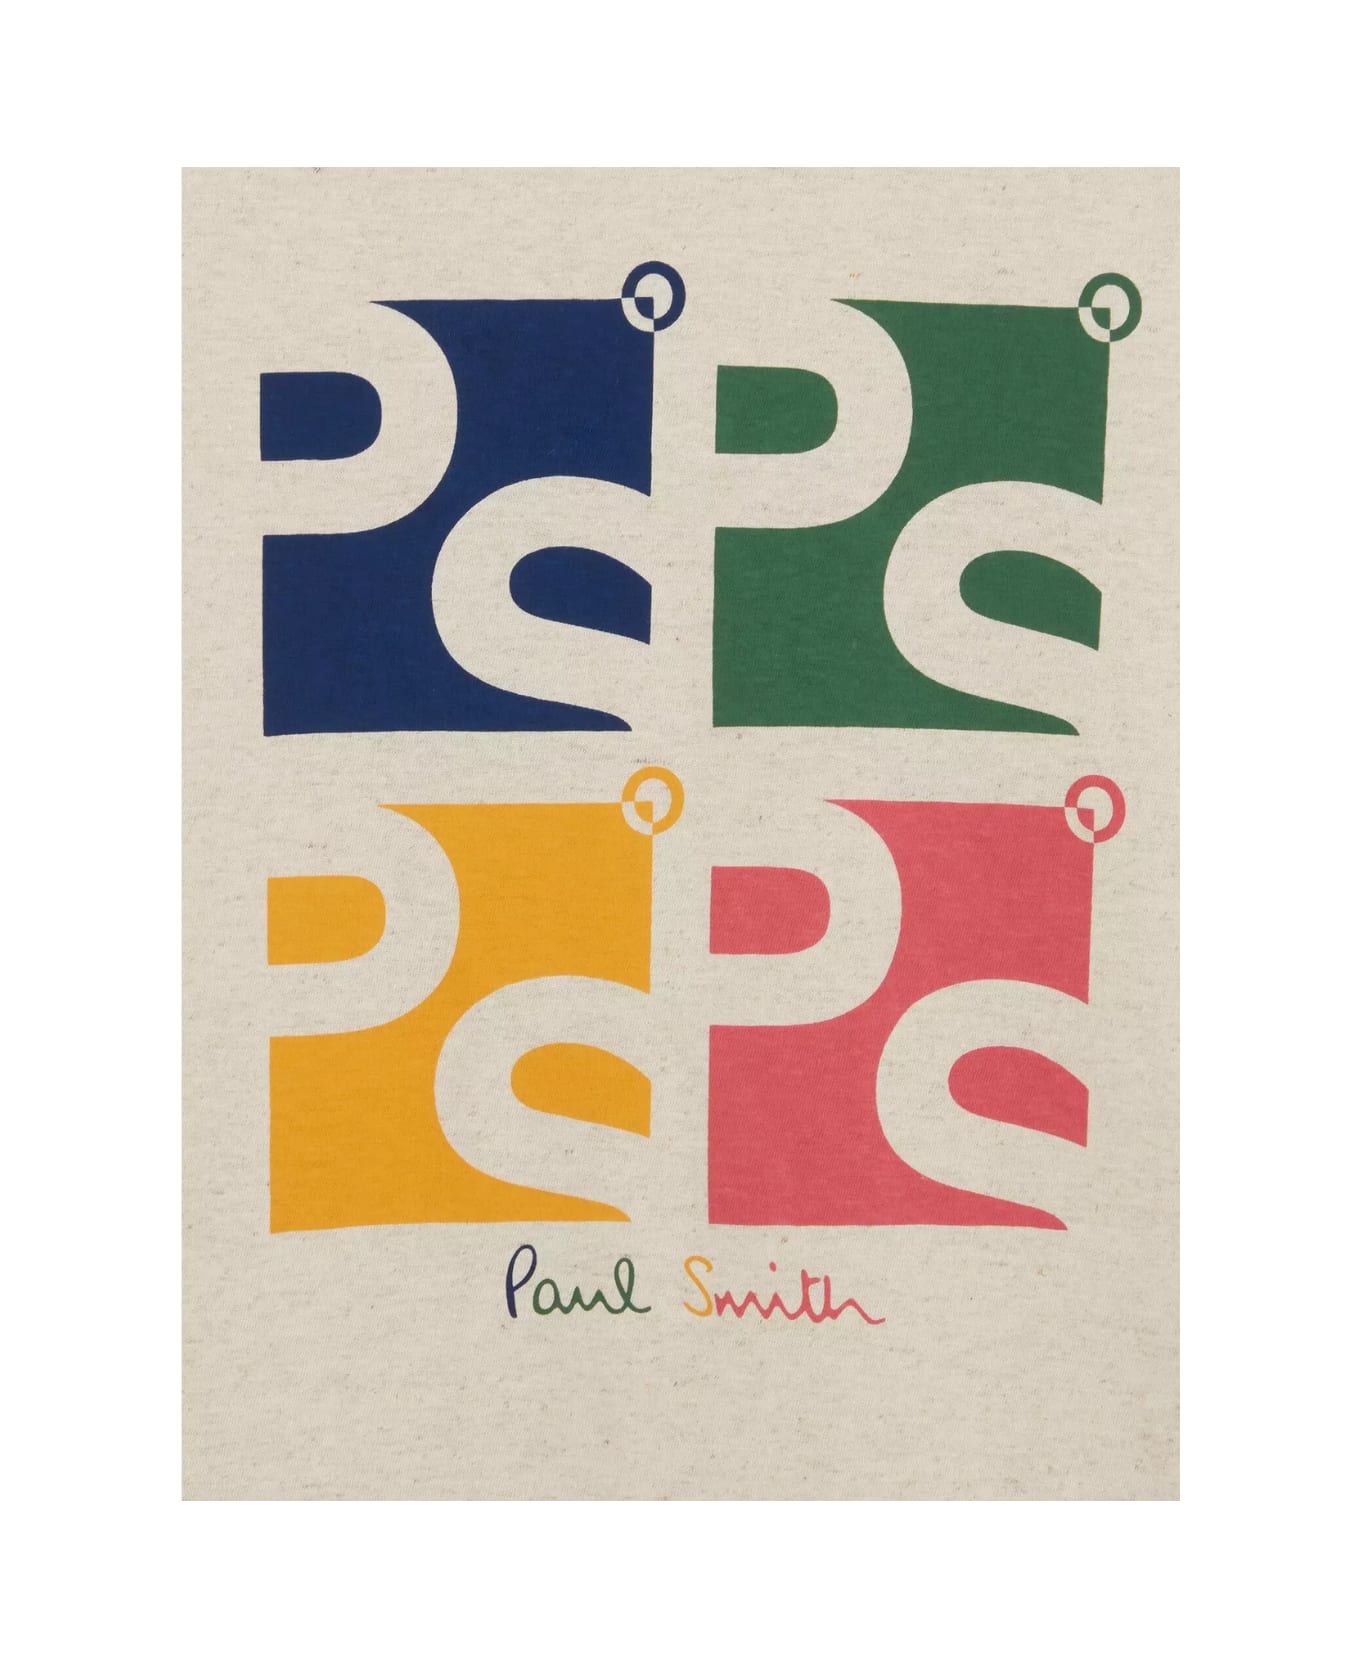 PS by Paul Smith Mens Reg Fit Ss T Shirt Square Ps - Whites